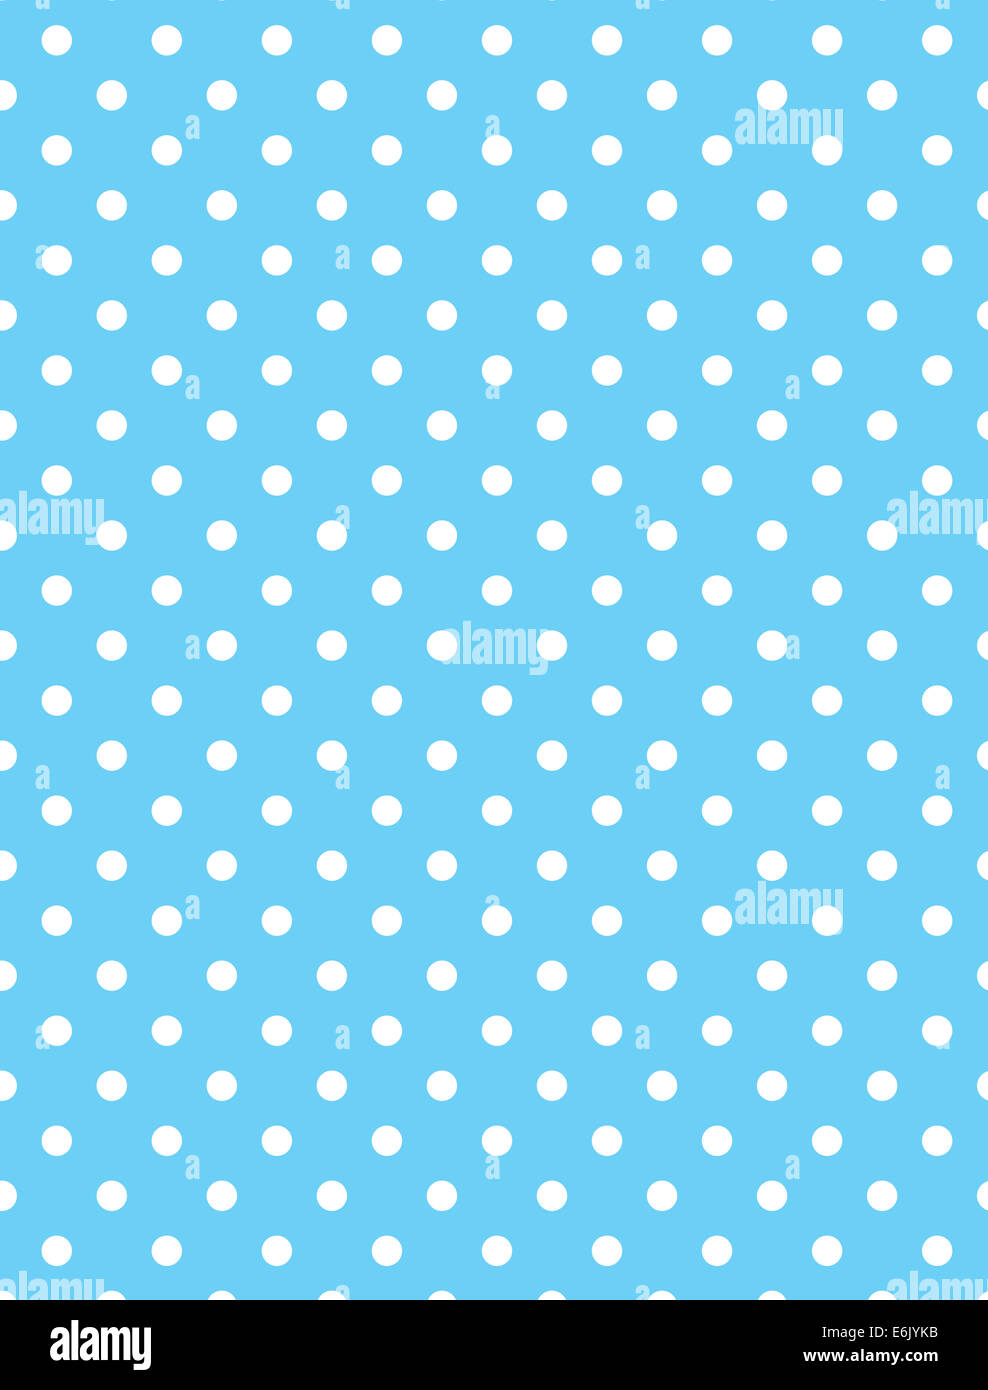 Blue background with white polka dots ...